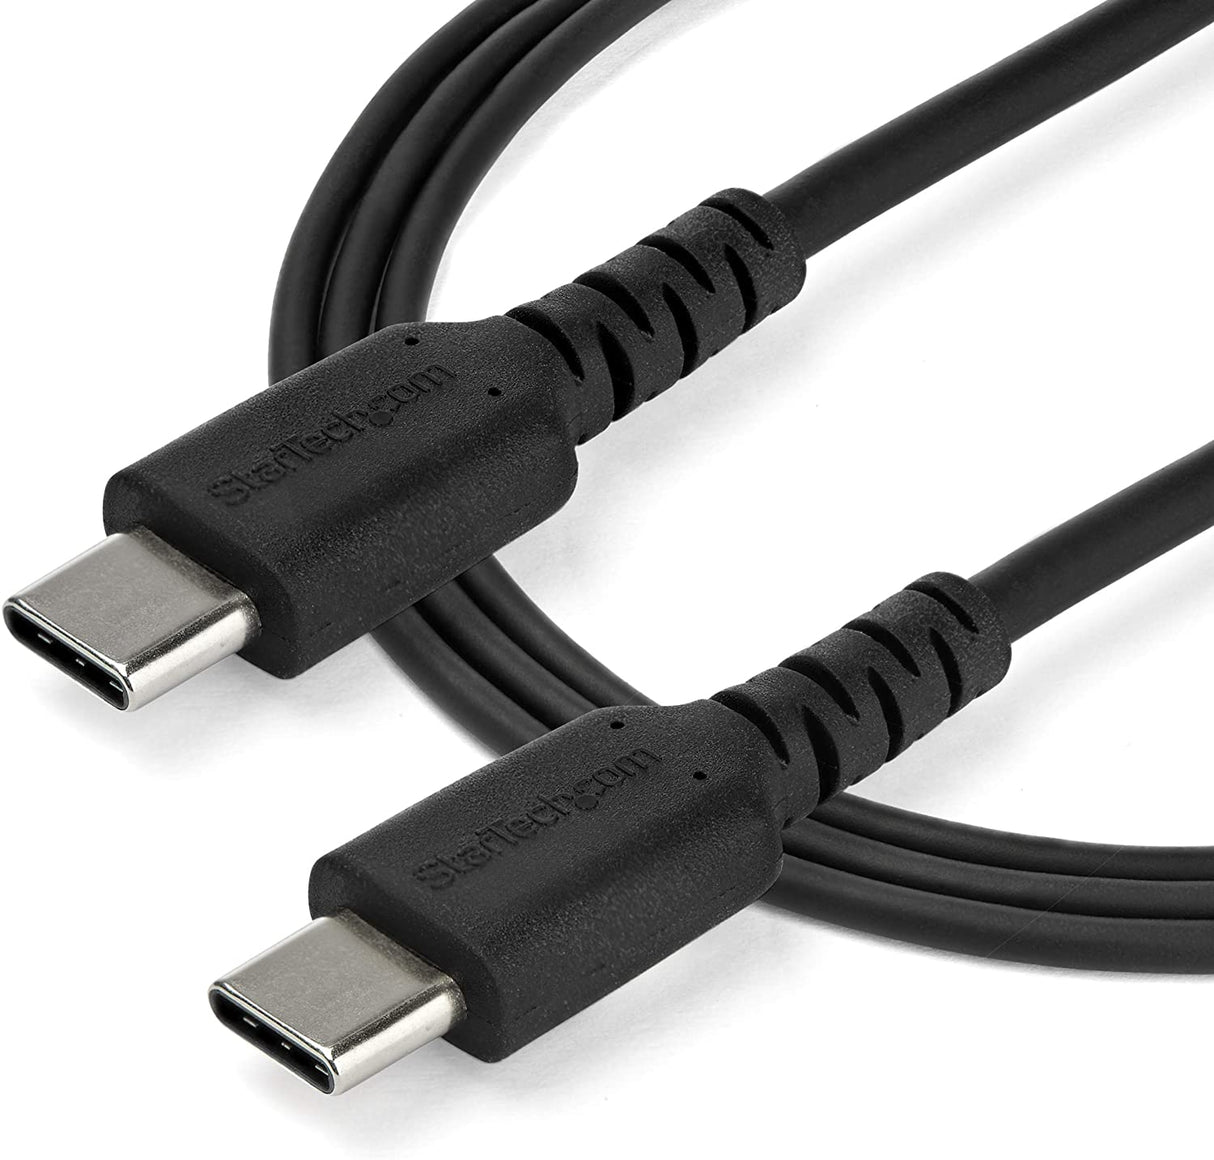 StarTech.com 2m USB C Charging Cable - Durable Fast Charge &amp; Sync USB 3.1 Type C to USB C Laptop Charger Cord - TPE Jacket Aramid Fiber M/M 60W - Samsung S10 S20 iPad Pro MS Surface (RUSB2AC2MB) Black 2m